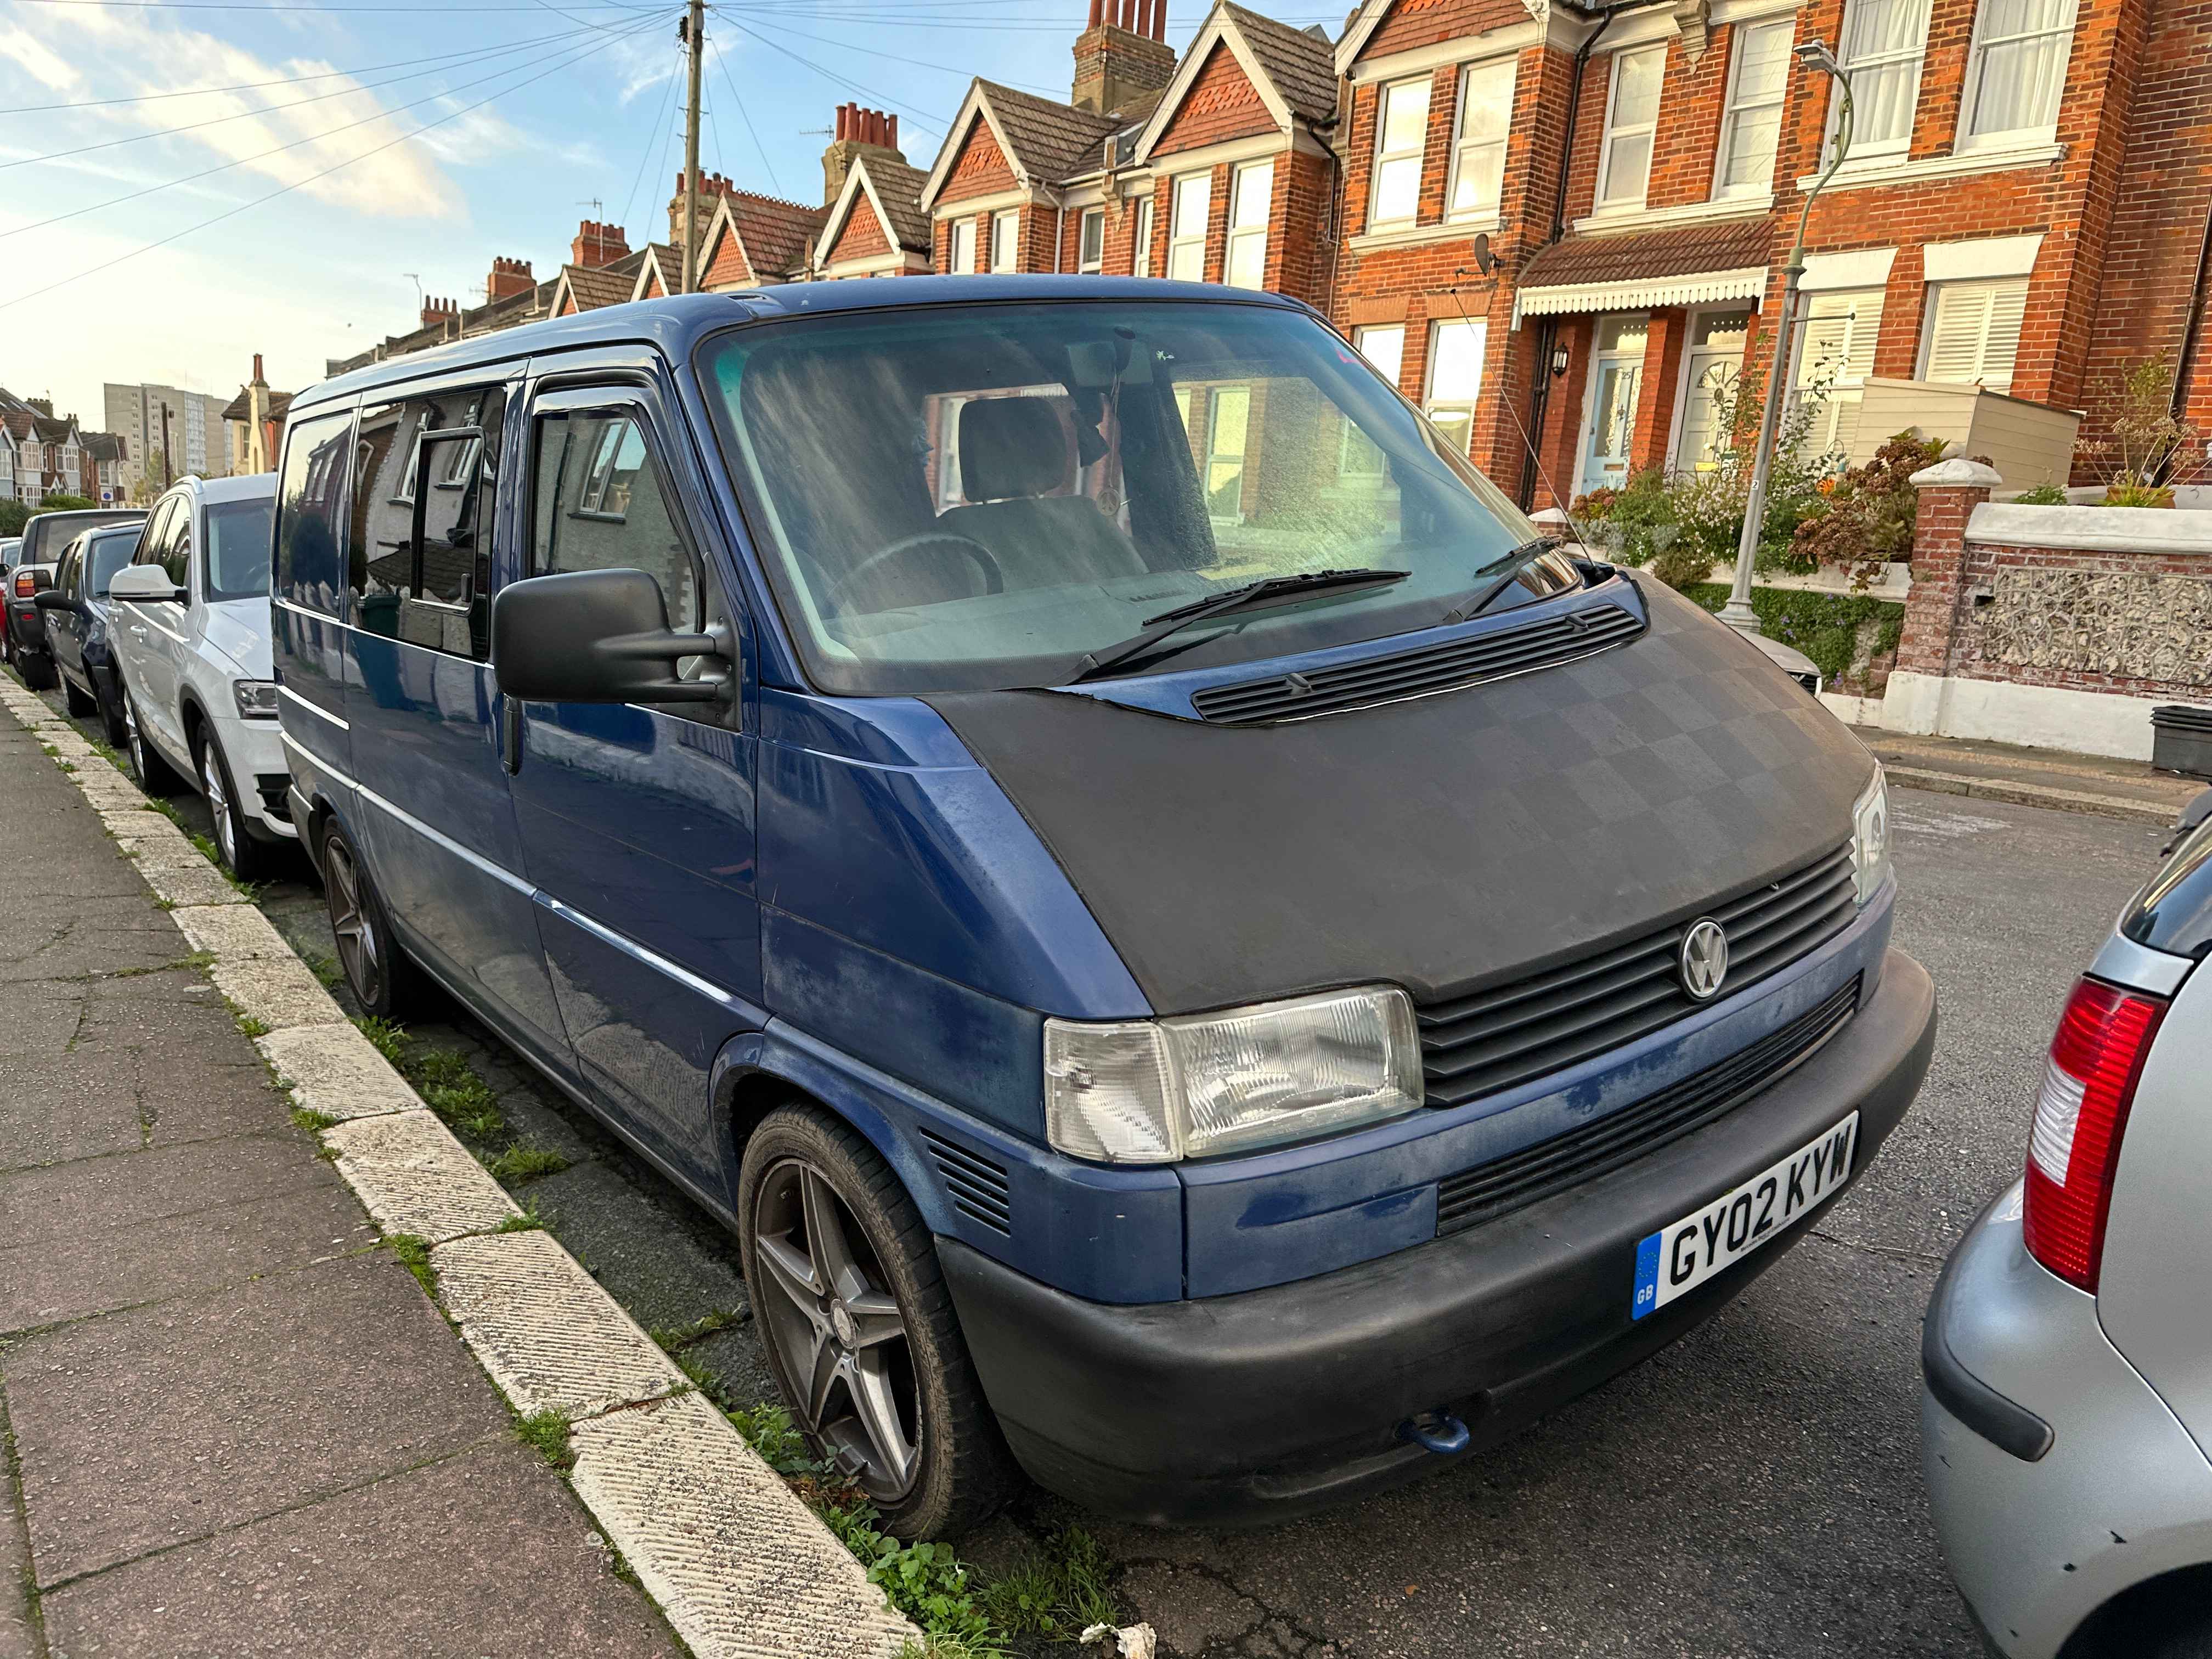 Photograph of GY02 KYW - a Blue Volkswagen Transporter camper van parked in Hollingdean by a non-resident. The second of eighteen photographs supplied by the residents of Hollingdean.